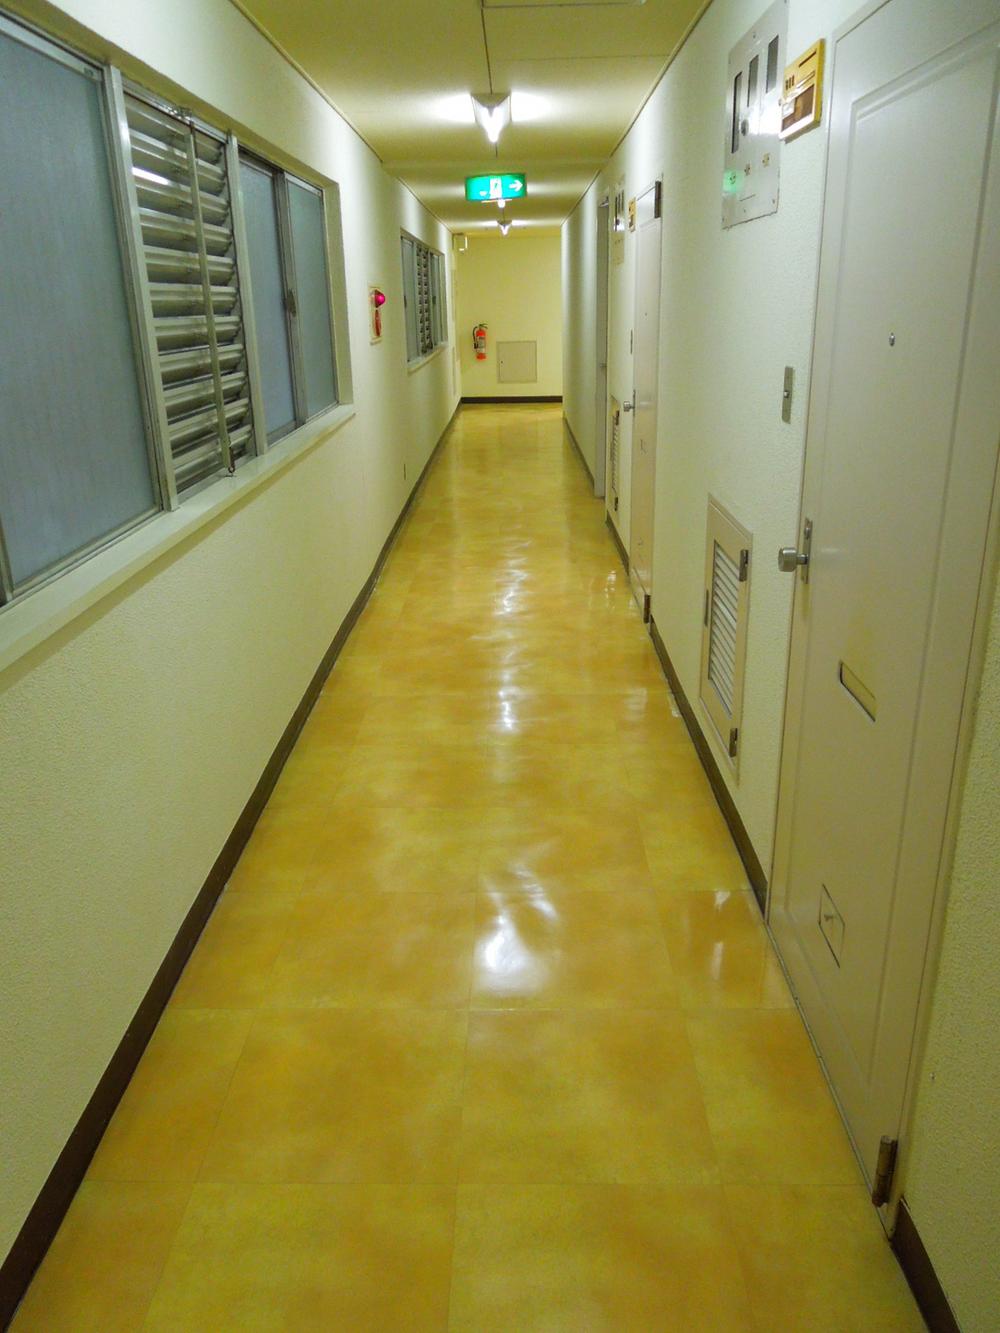 Other common areas. Inner hallway specification